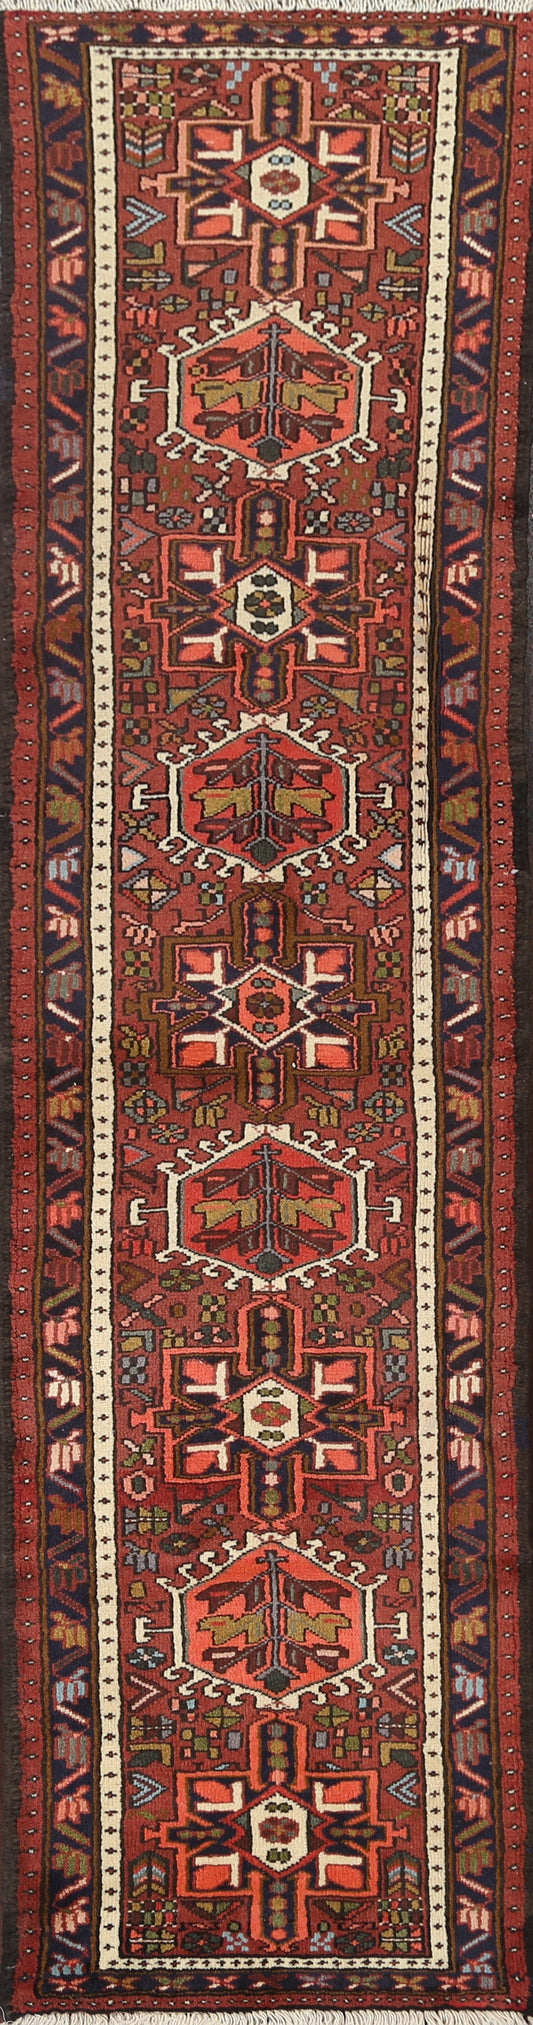 Hand-Knotted Gharajeh Persian Runner Rug 2x9